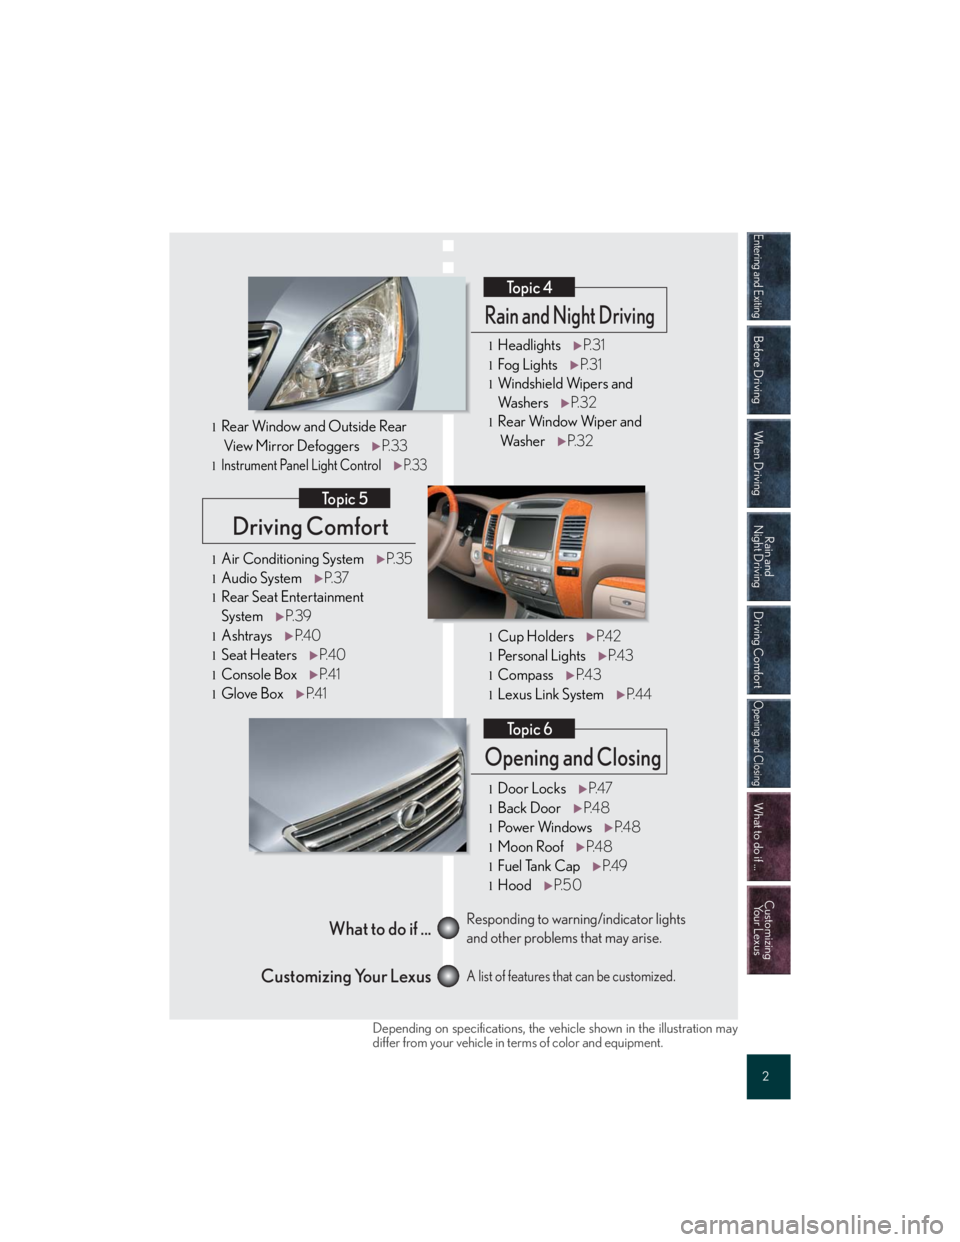 Lexus GX470 2007  Do-it-yourself maintenance / Entering and Exiting
Before Driving
When Driving
Rain and 
Night Driving
Driving Comfort
Opening and Closing
What to do if ...
Customizing
Yo u r  L e x u s
2
Driving Comfort
Topic 5
Opening and Closi